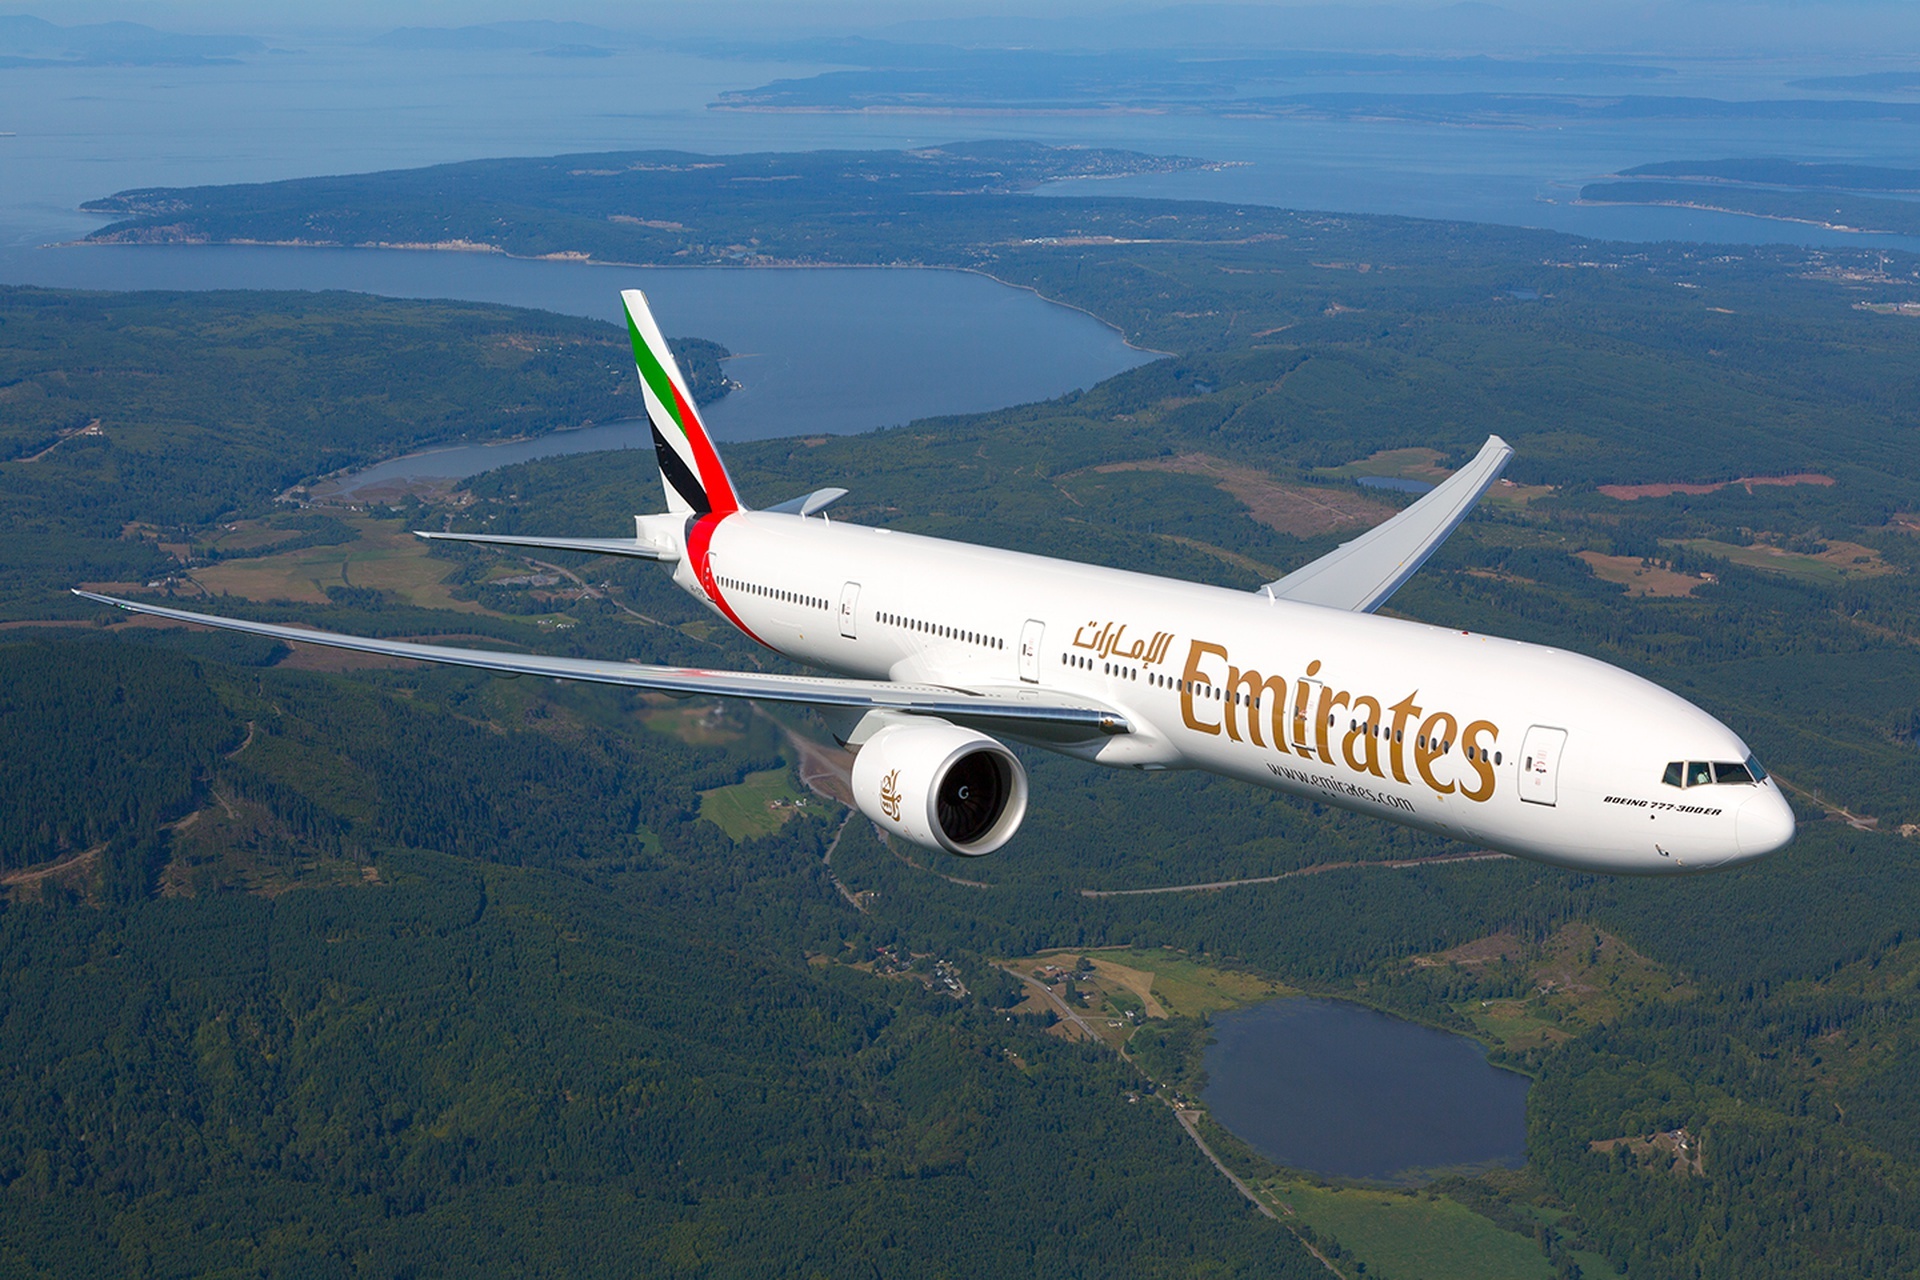 Emirates Airline, Flight network expansion, Moscow route, Airline news, 1920x1280 HD Desktop